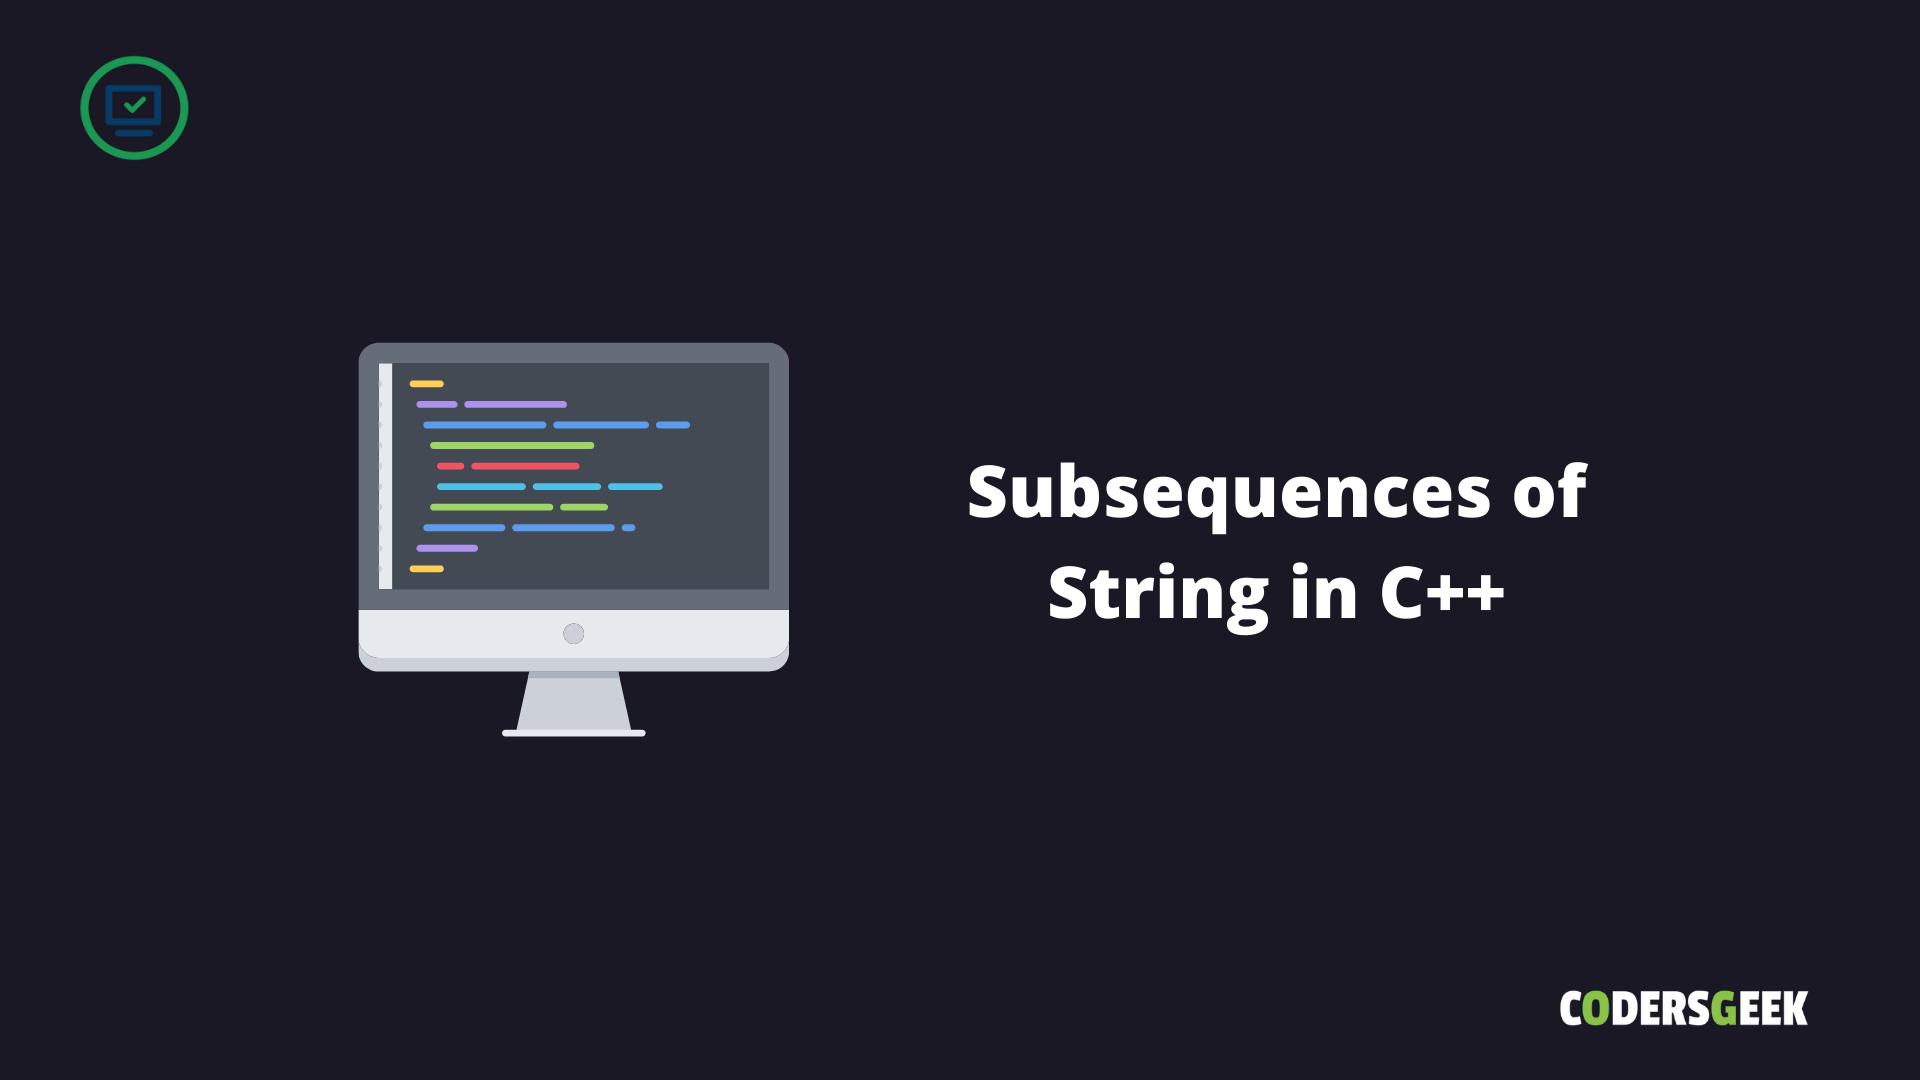 Subsequences of String in C++